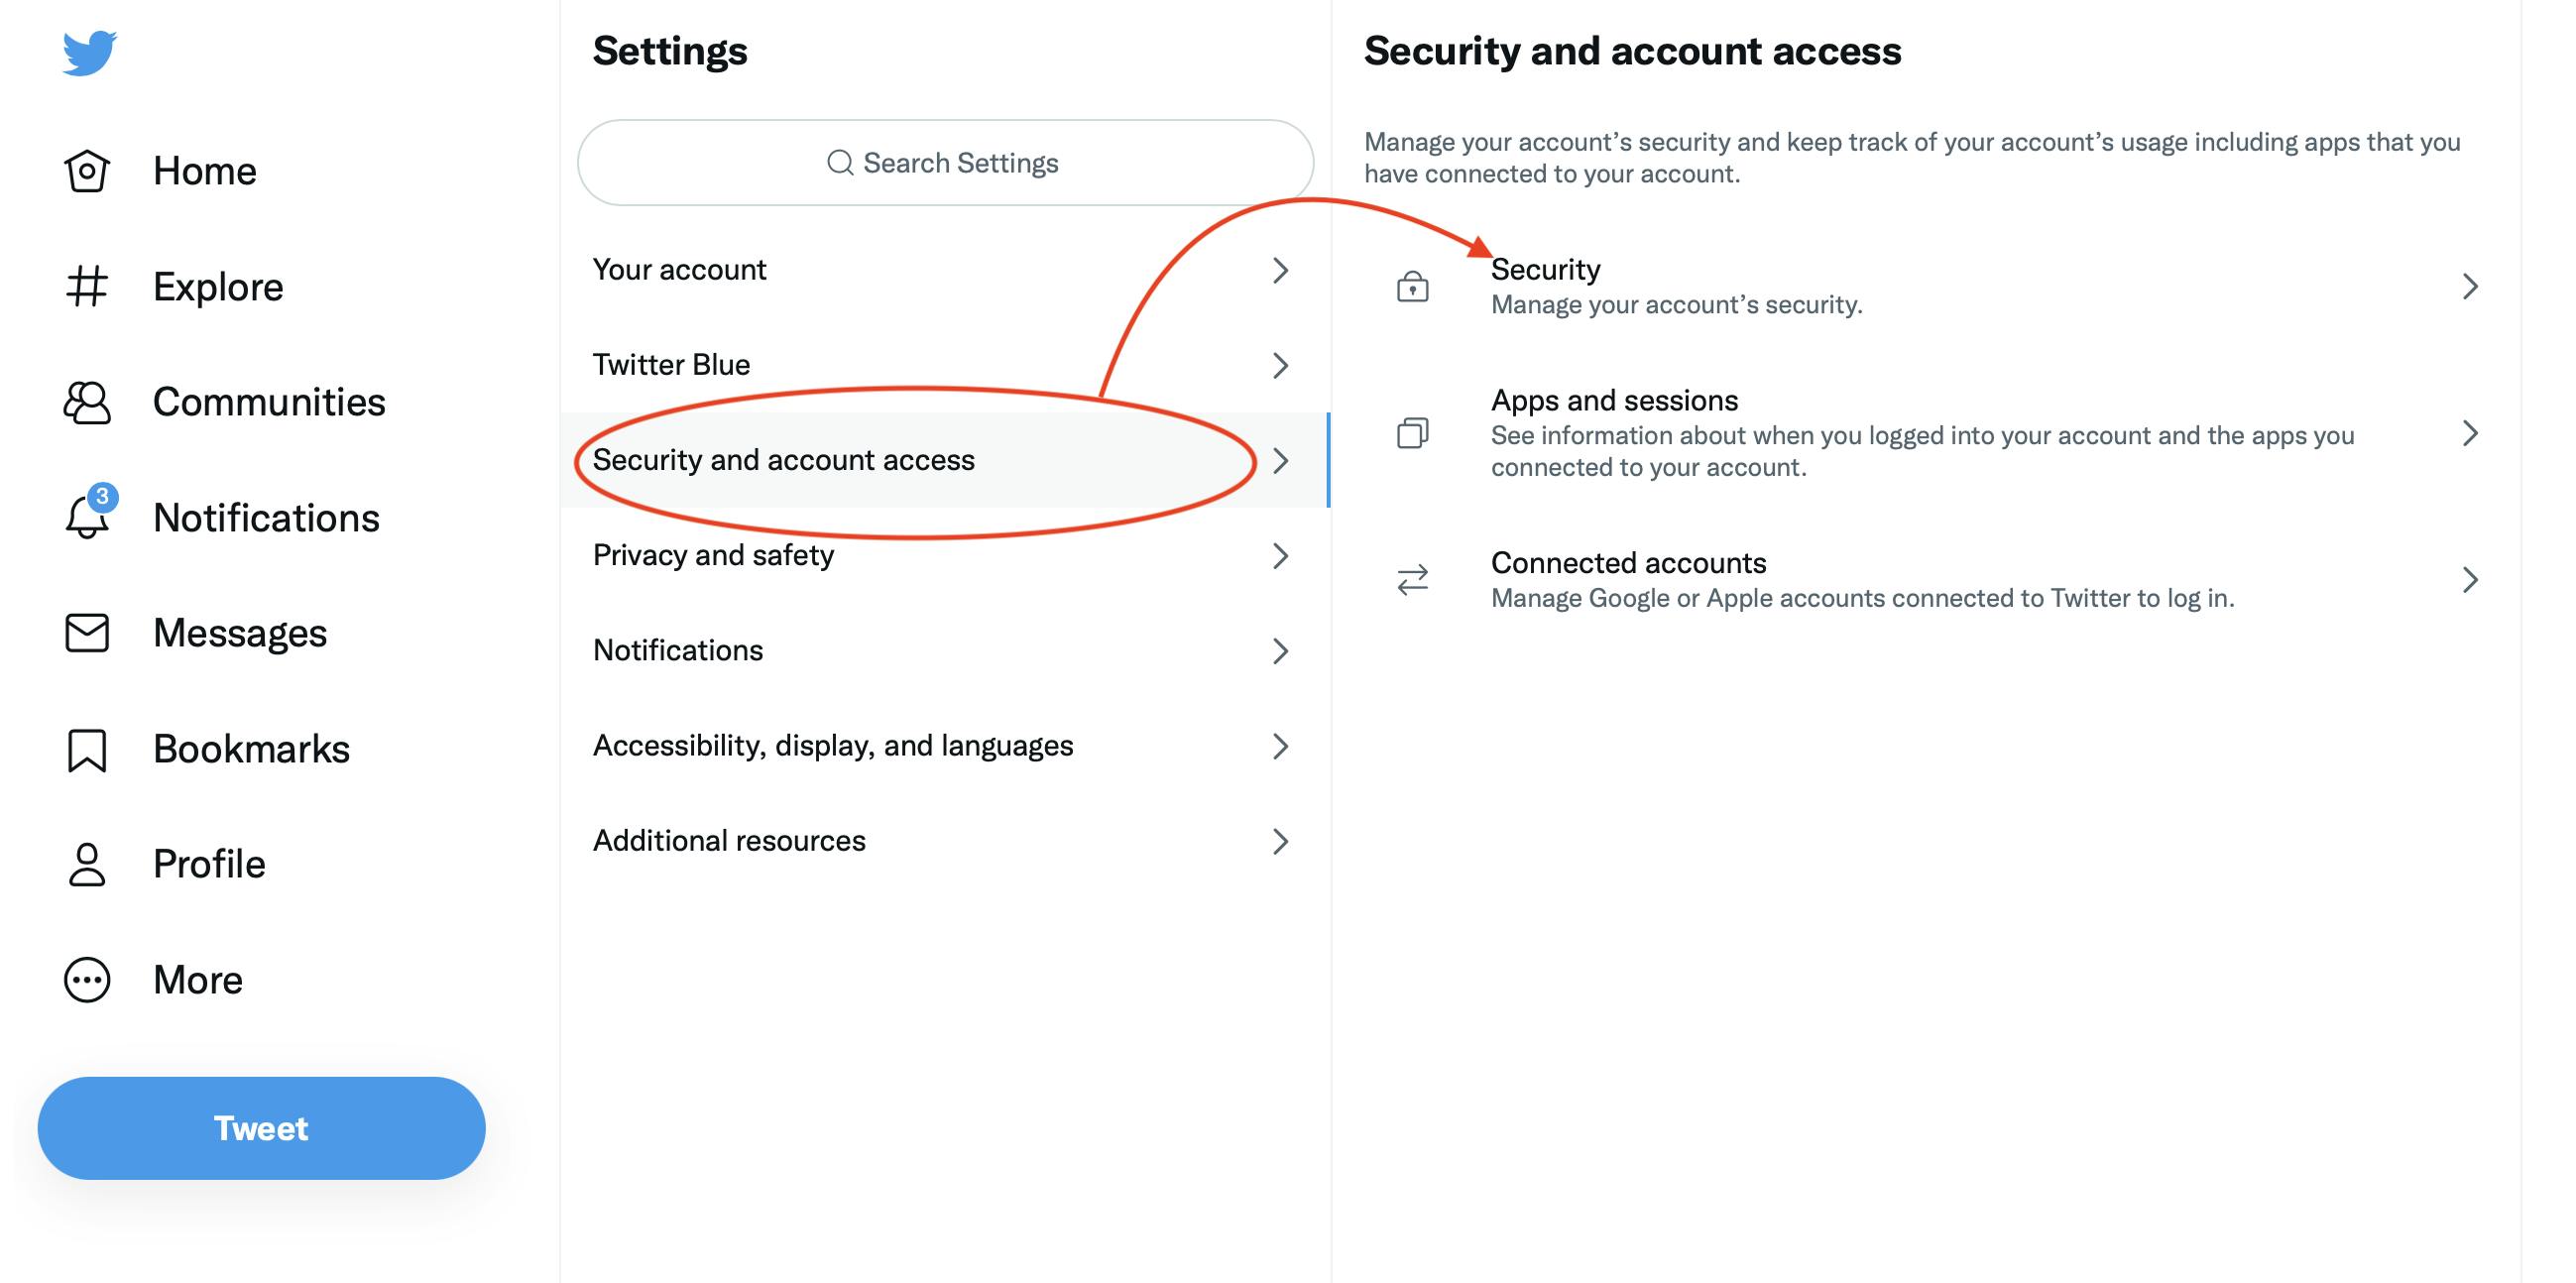 Twitter settings, click on Security and account access, then Security